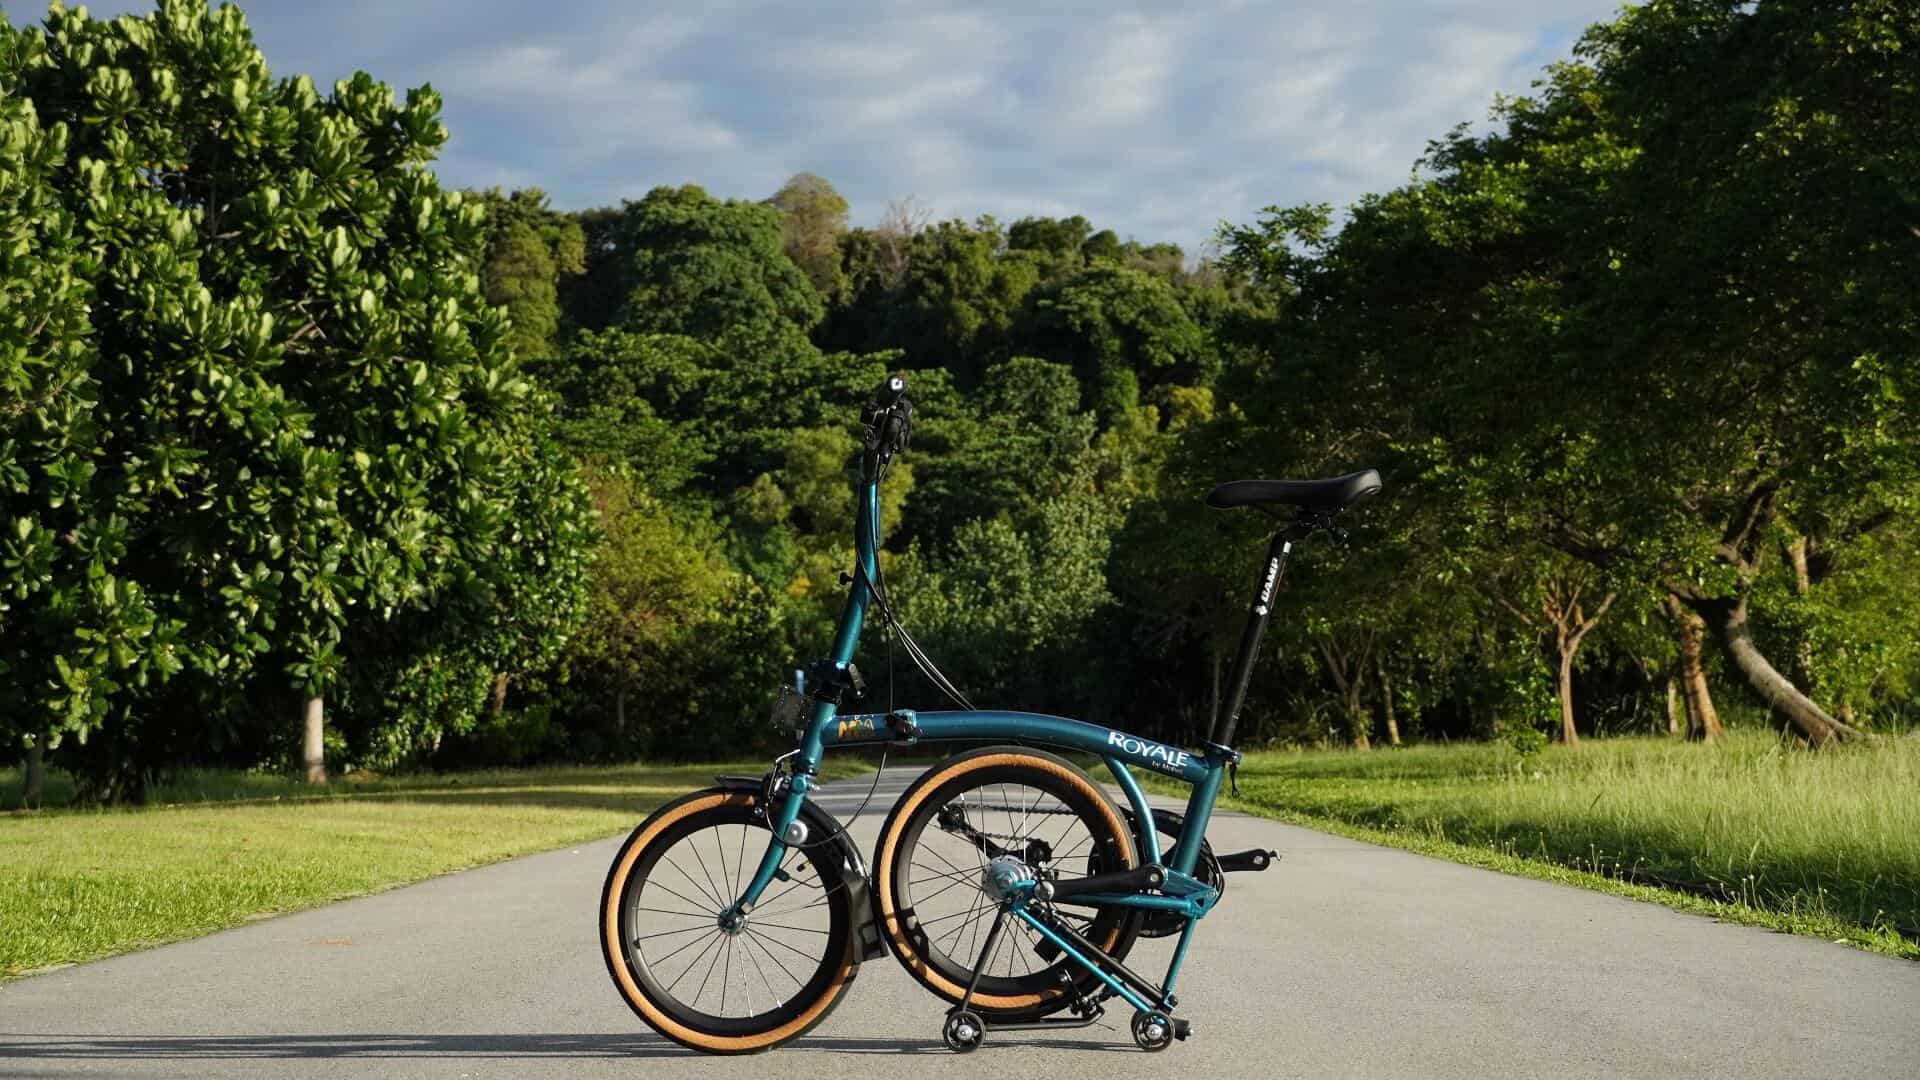 MOBOT ROYALE (OCEAN GREEN) foldable bicycle at Lazarus Island (1)